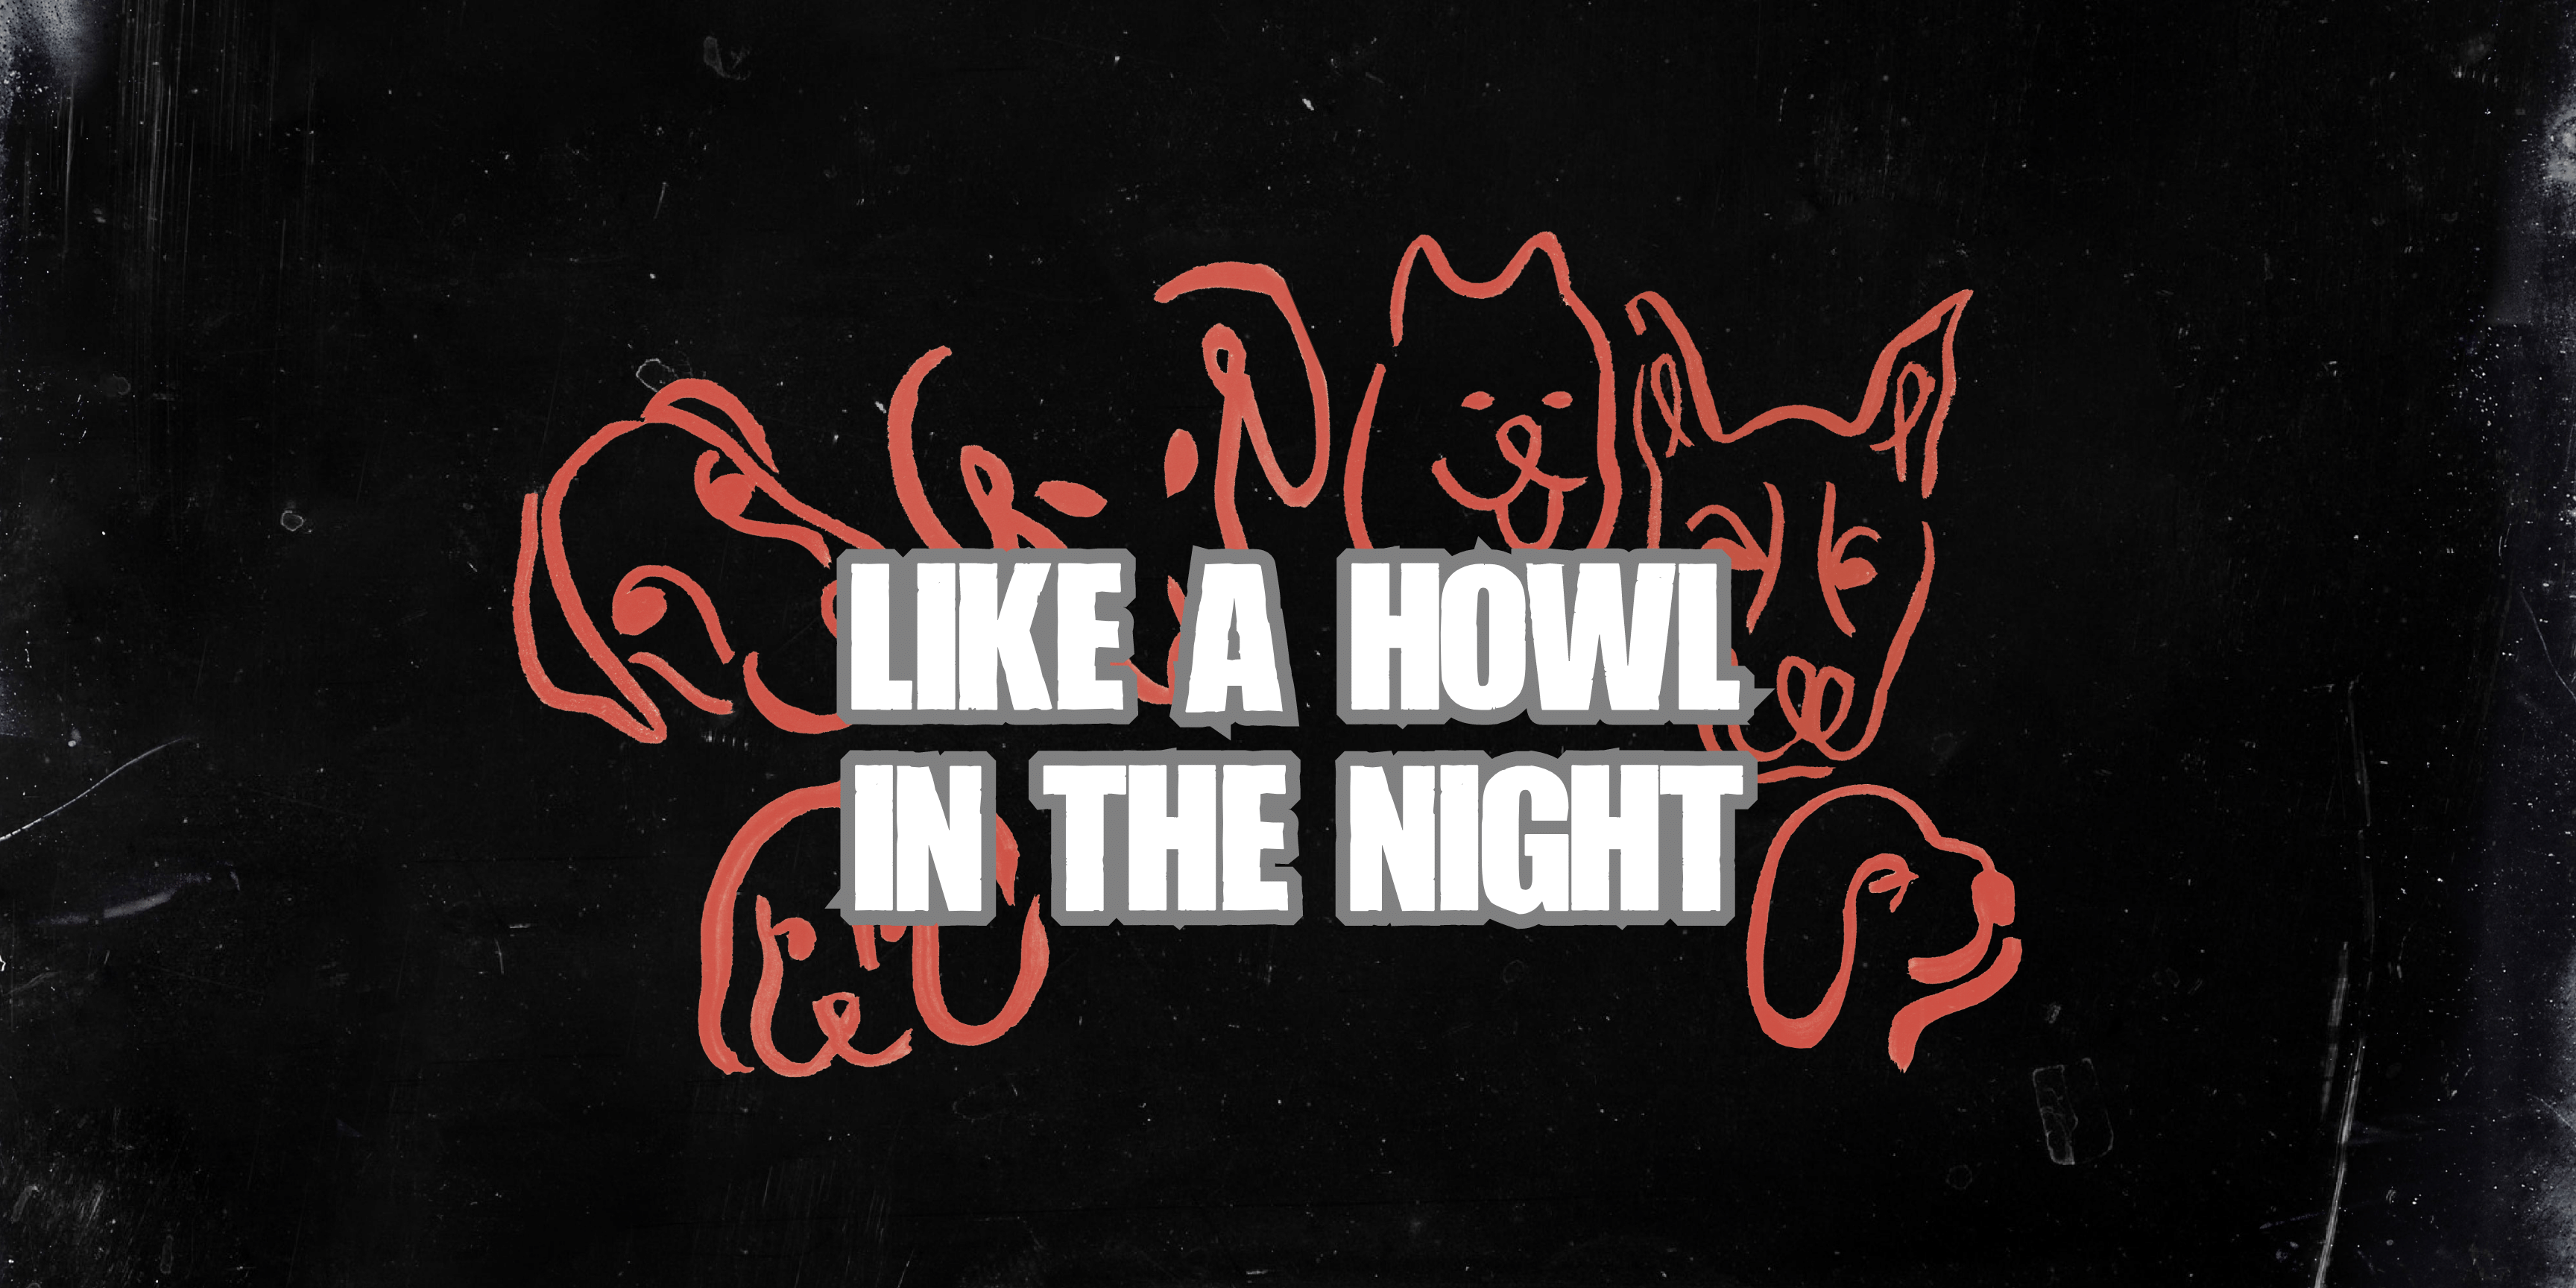 like a howl in the night - The canine supplement for Liminal Horror